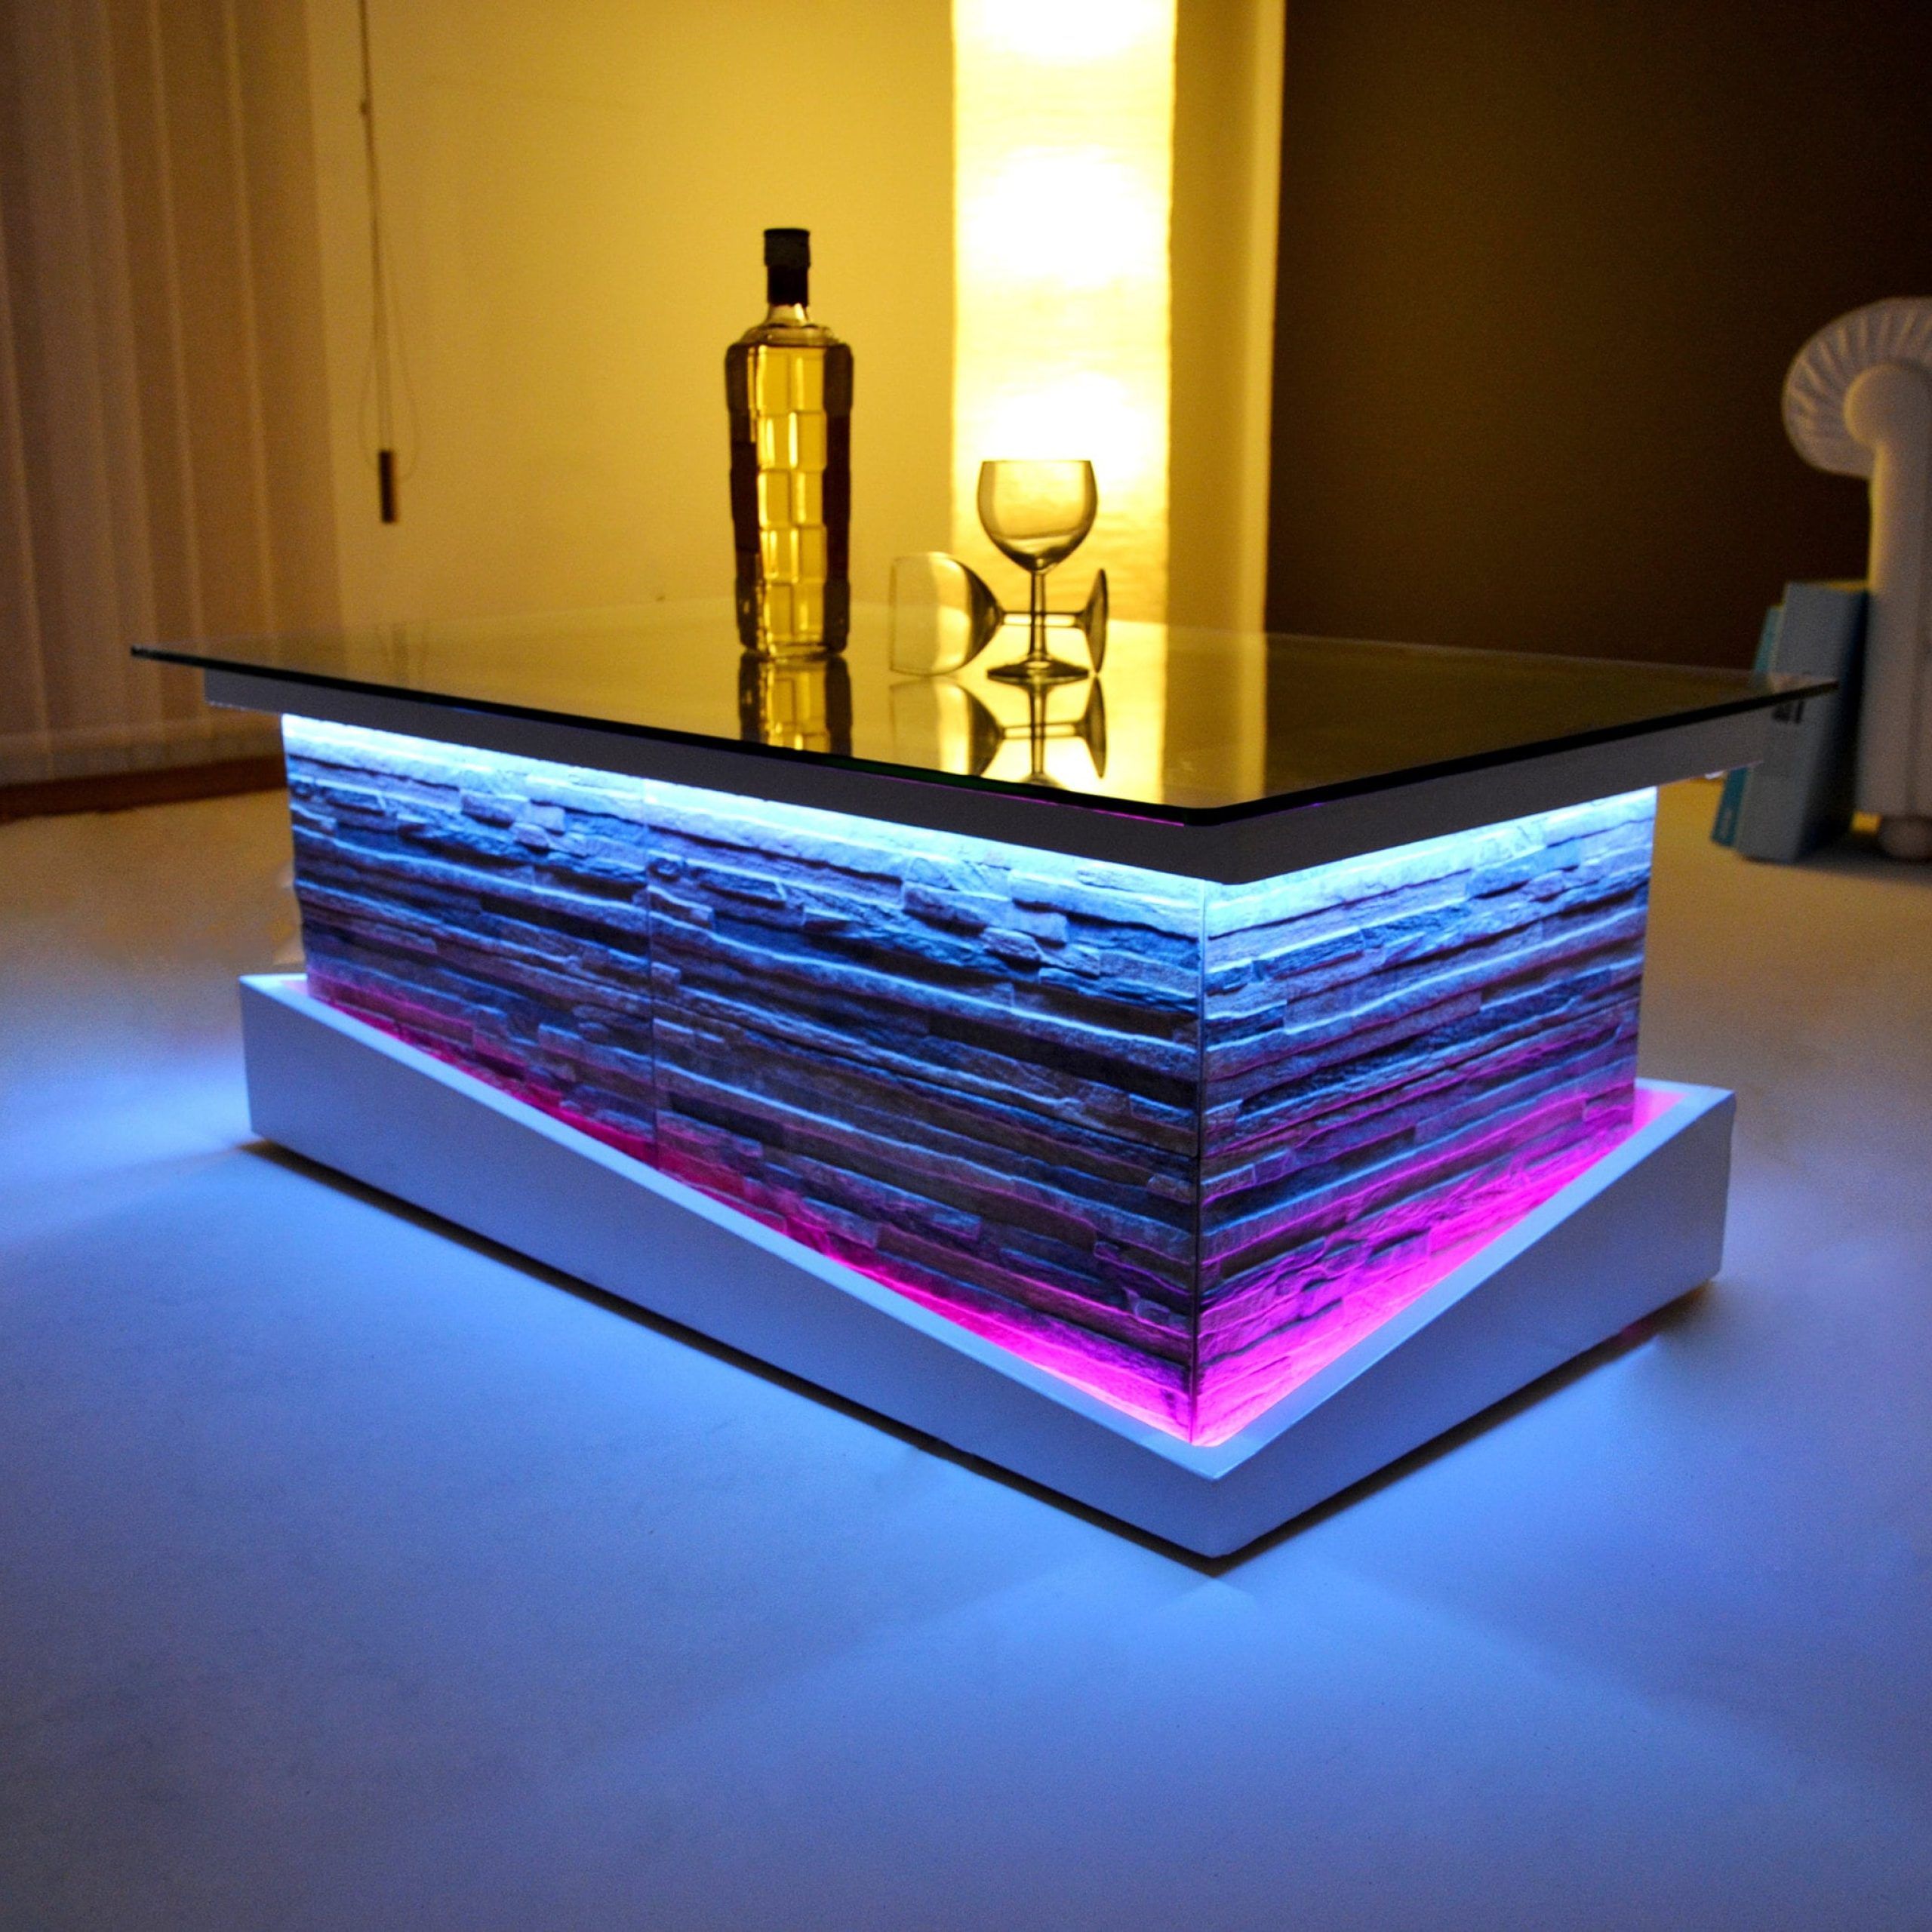 Glass Coffee Table With Led Lights Rustic / Modern Design | Etsy In Coffee Tables With Drawers And Led Lights (Gallery 12 of 20)